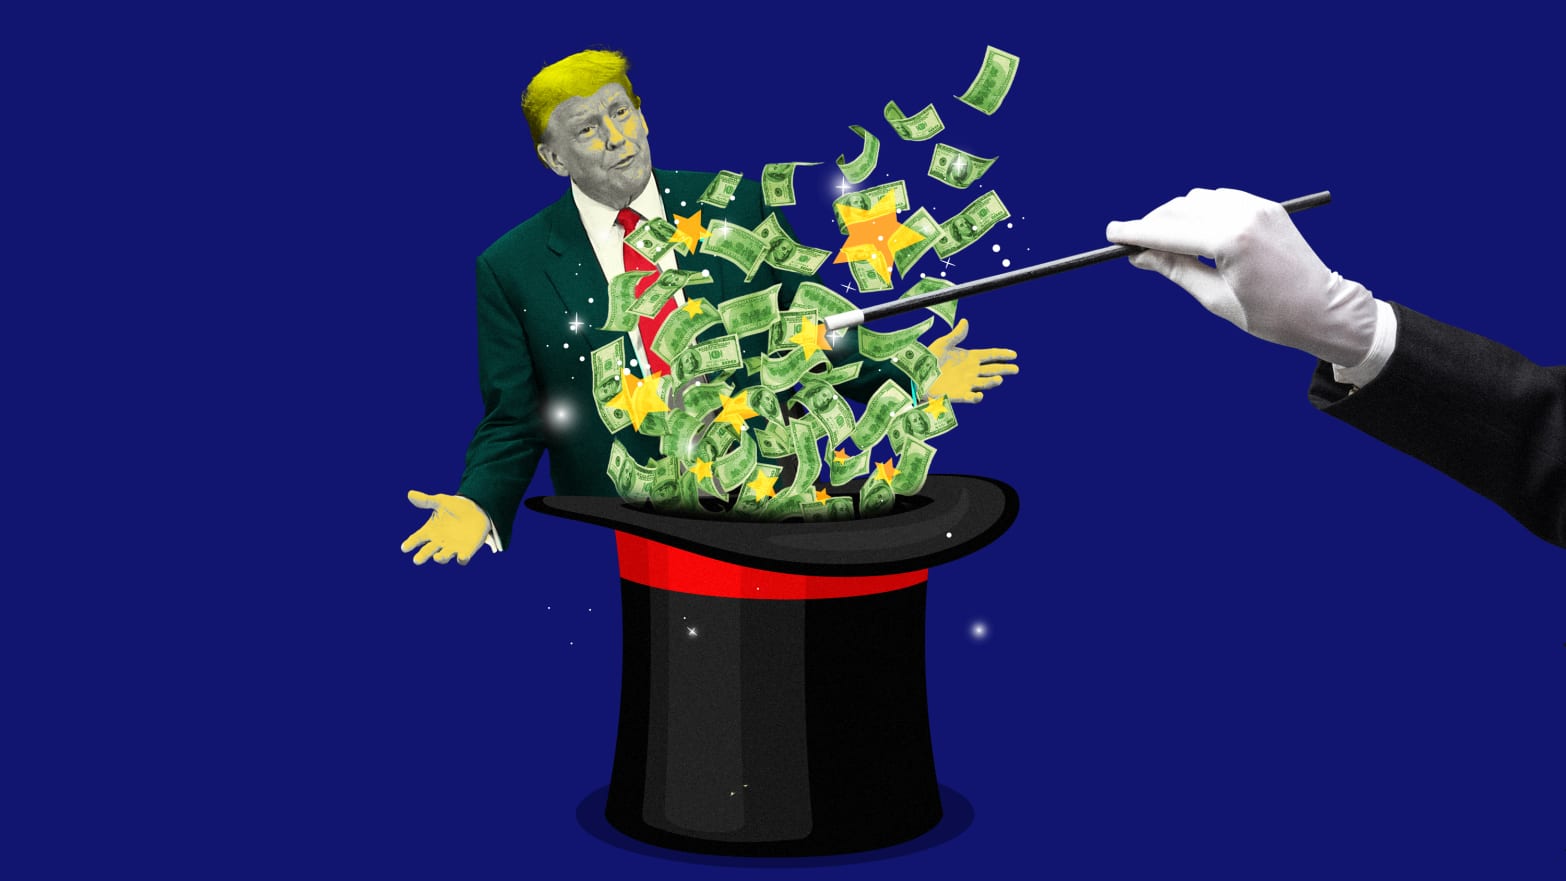 A photo illustration of former President Donald Trump and a magician casting money out of a hat.